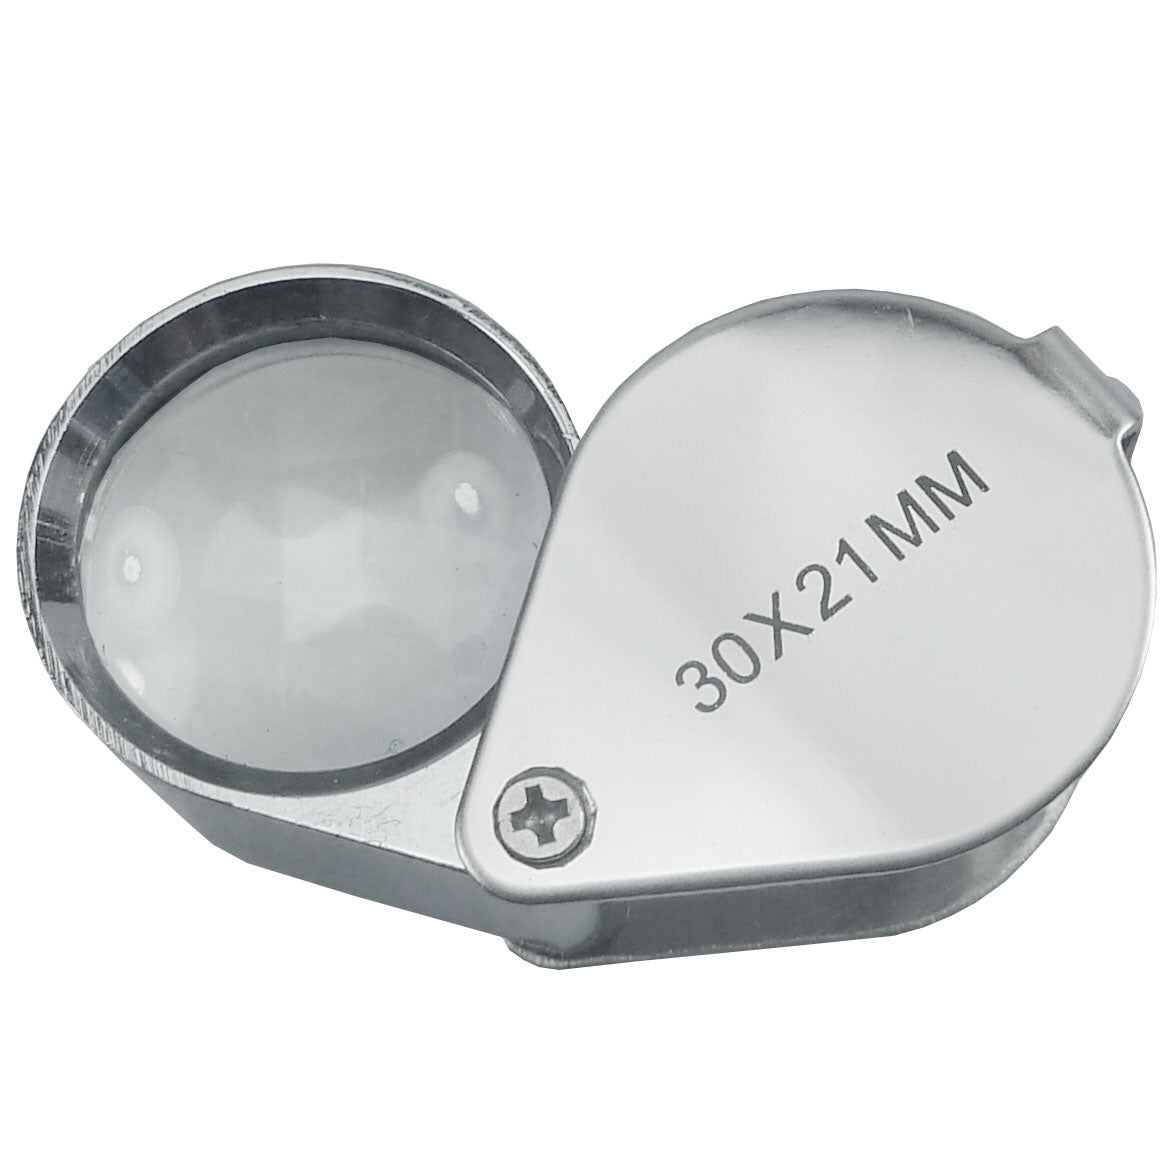 Portable Jewelry Jewellery Loupe Magnifier Magnifying Glass